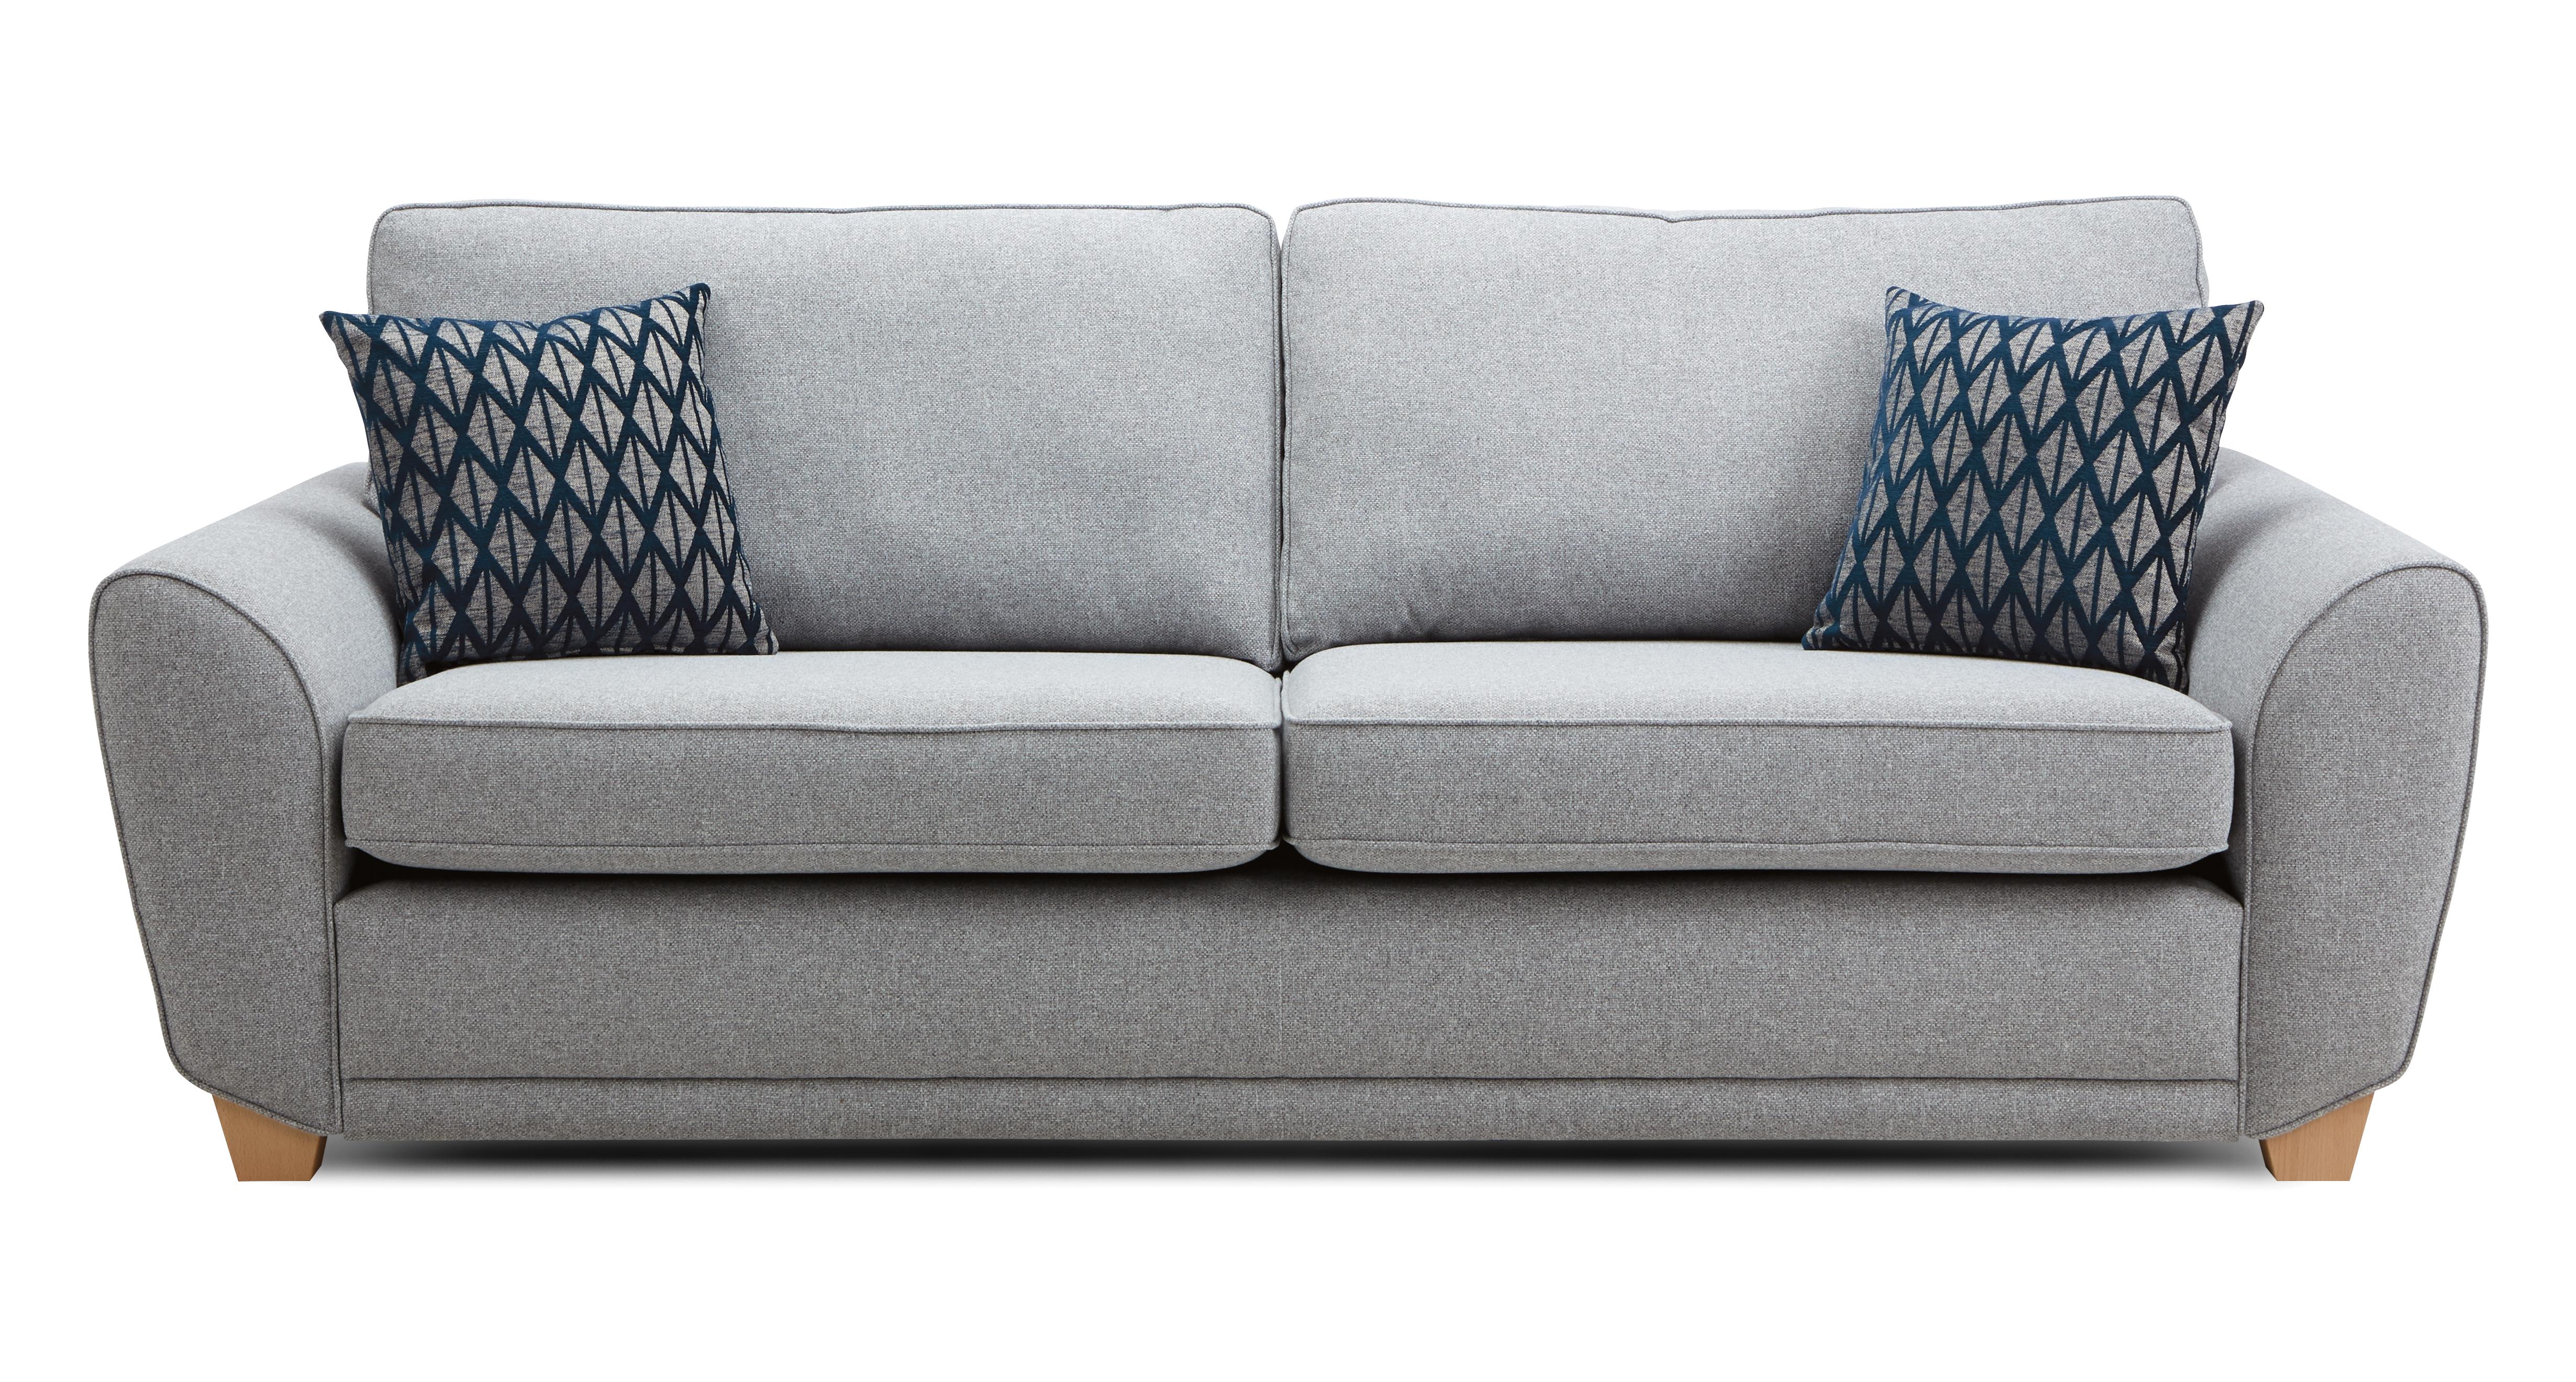 dfs sofa bed removable arms